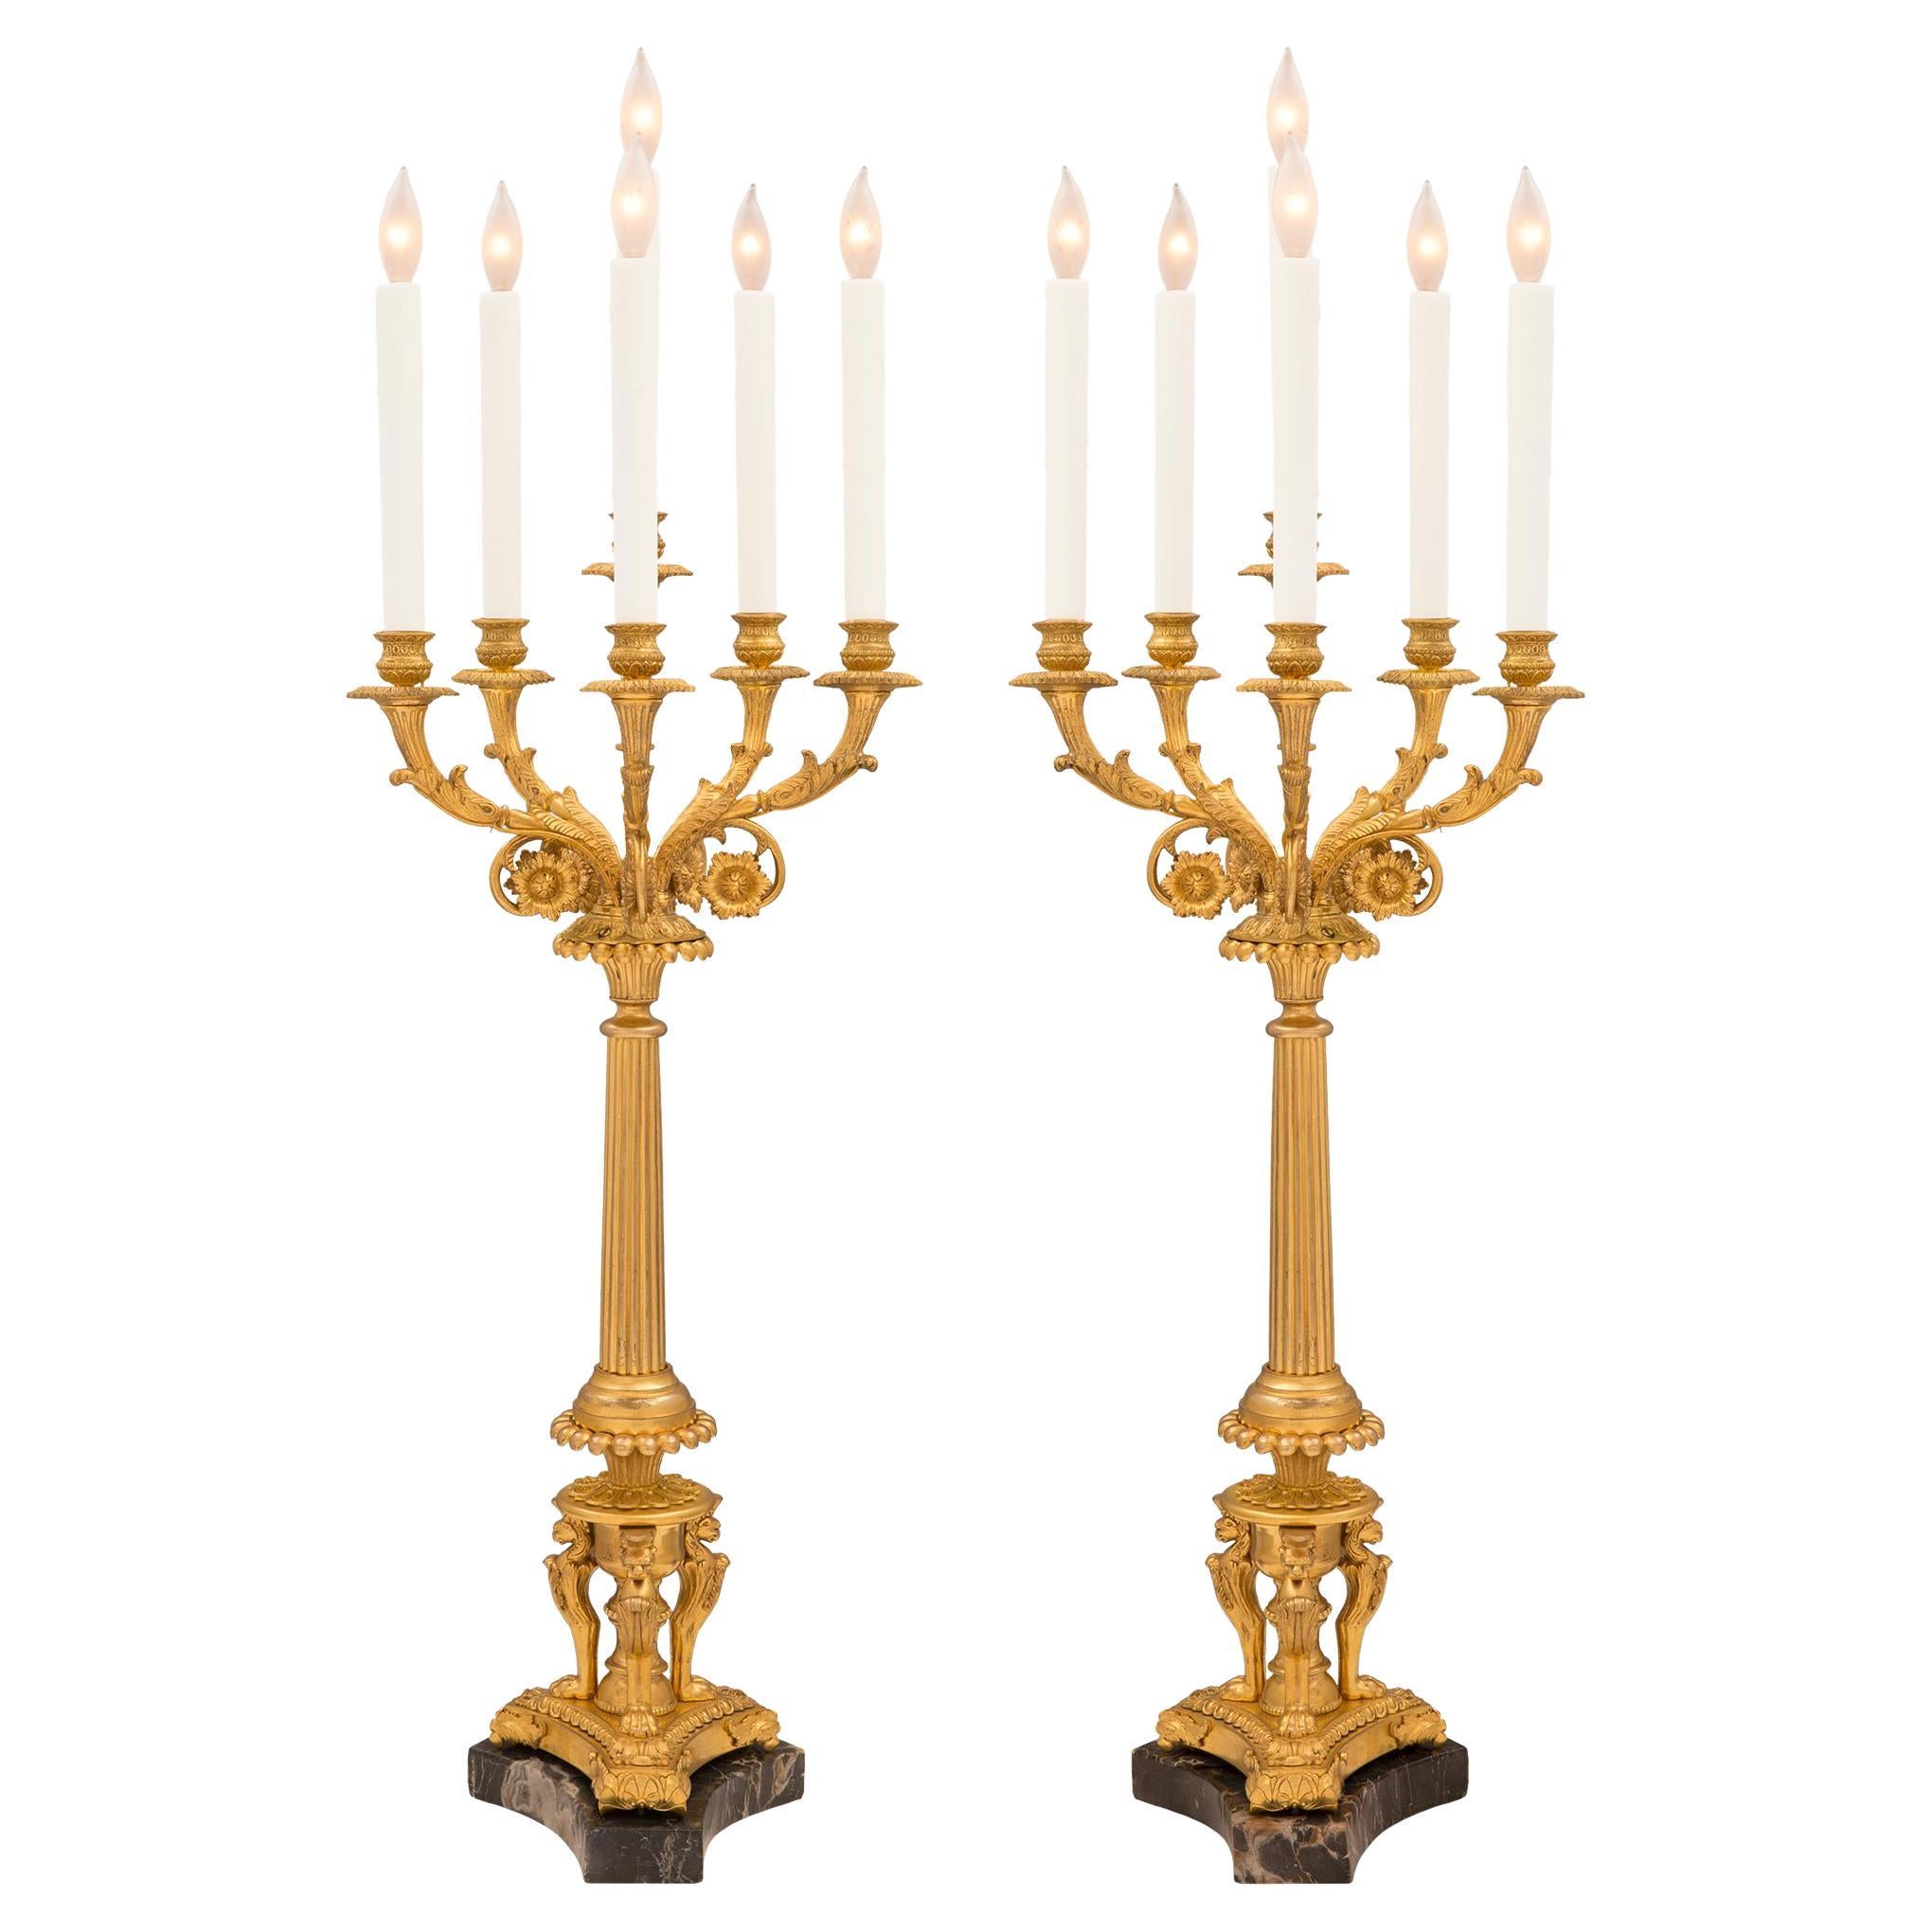 Pair of French Mid-19th Century Empire Style Ormolu Candelabras For Sale